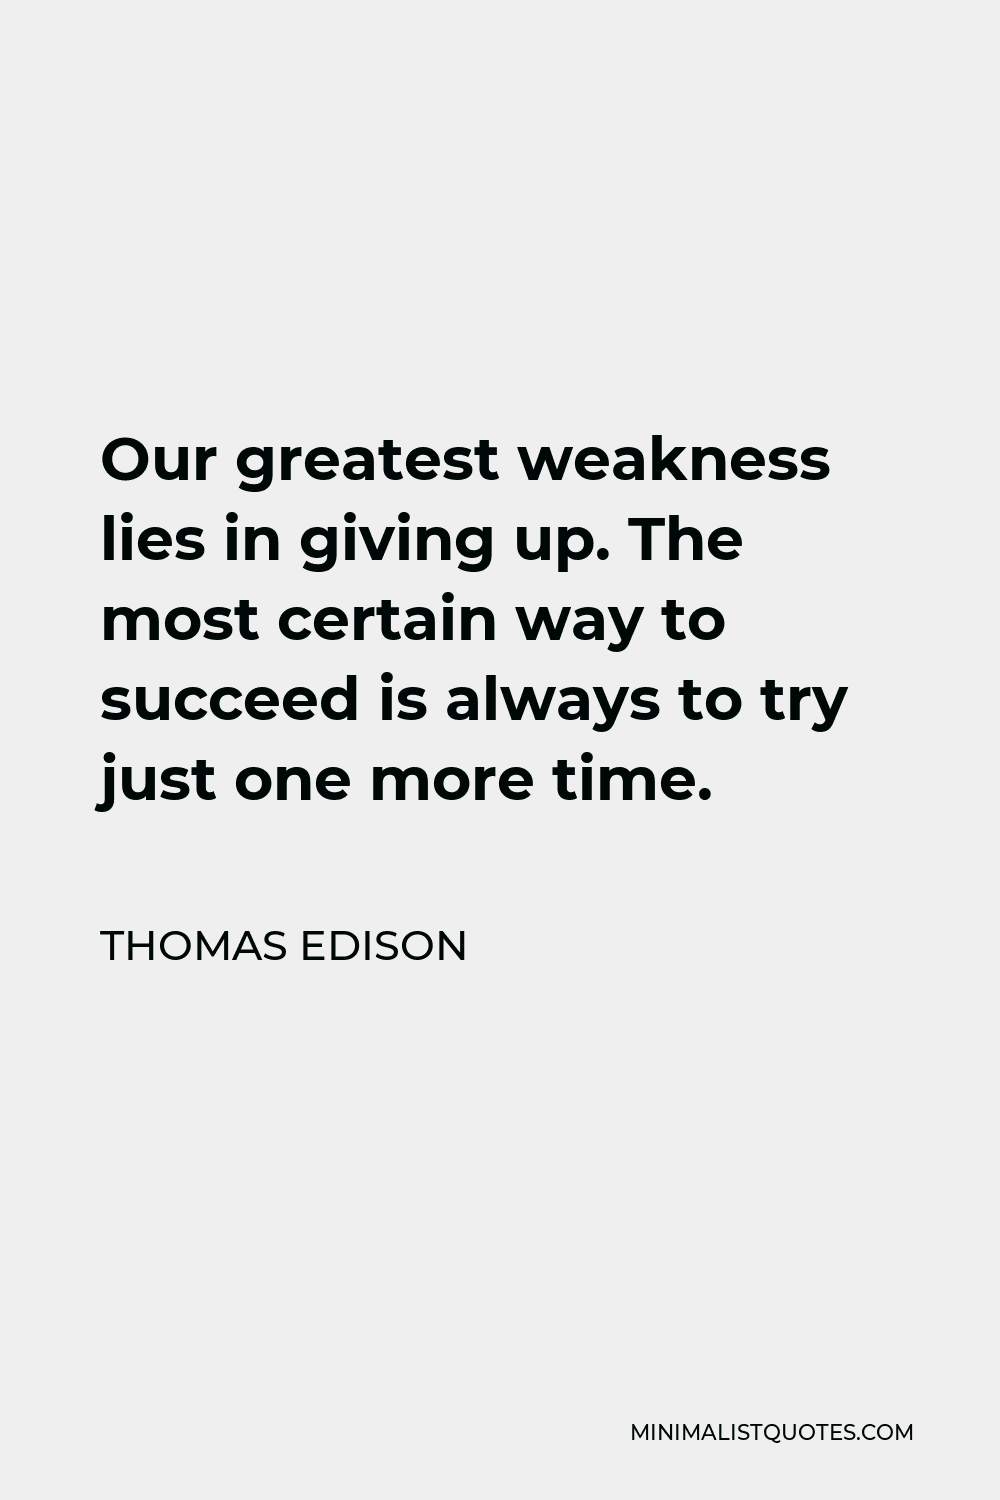 Thomas Edison Quote - Our greatest weakness lies in giving up. The most certain way to succeed is always to try just one more time.